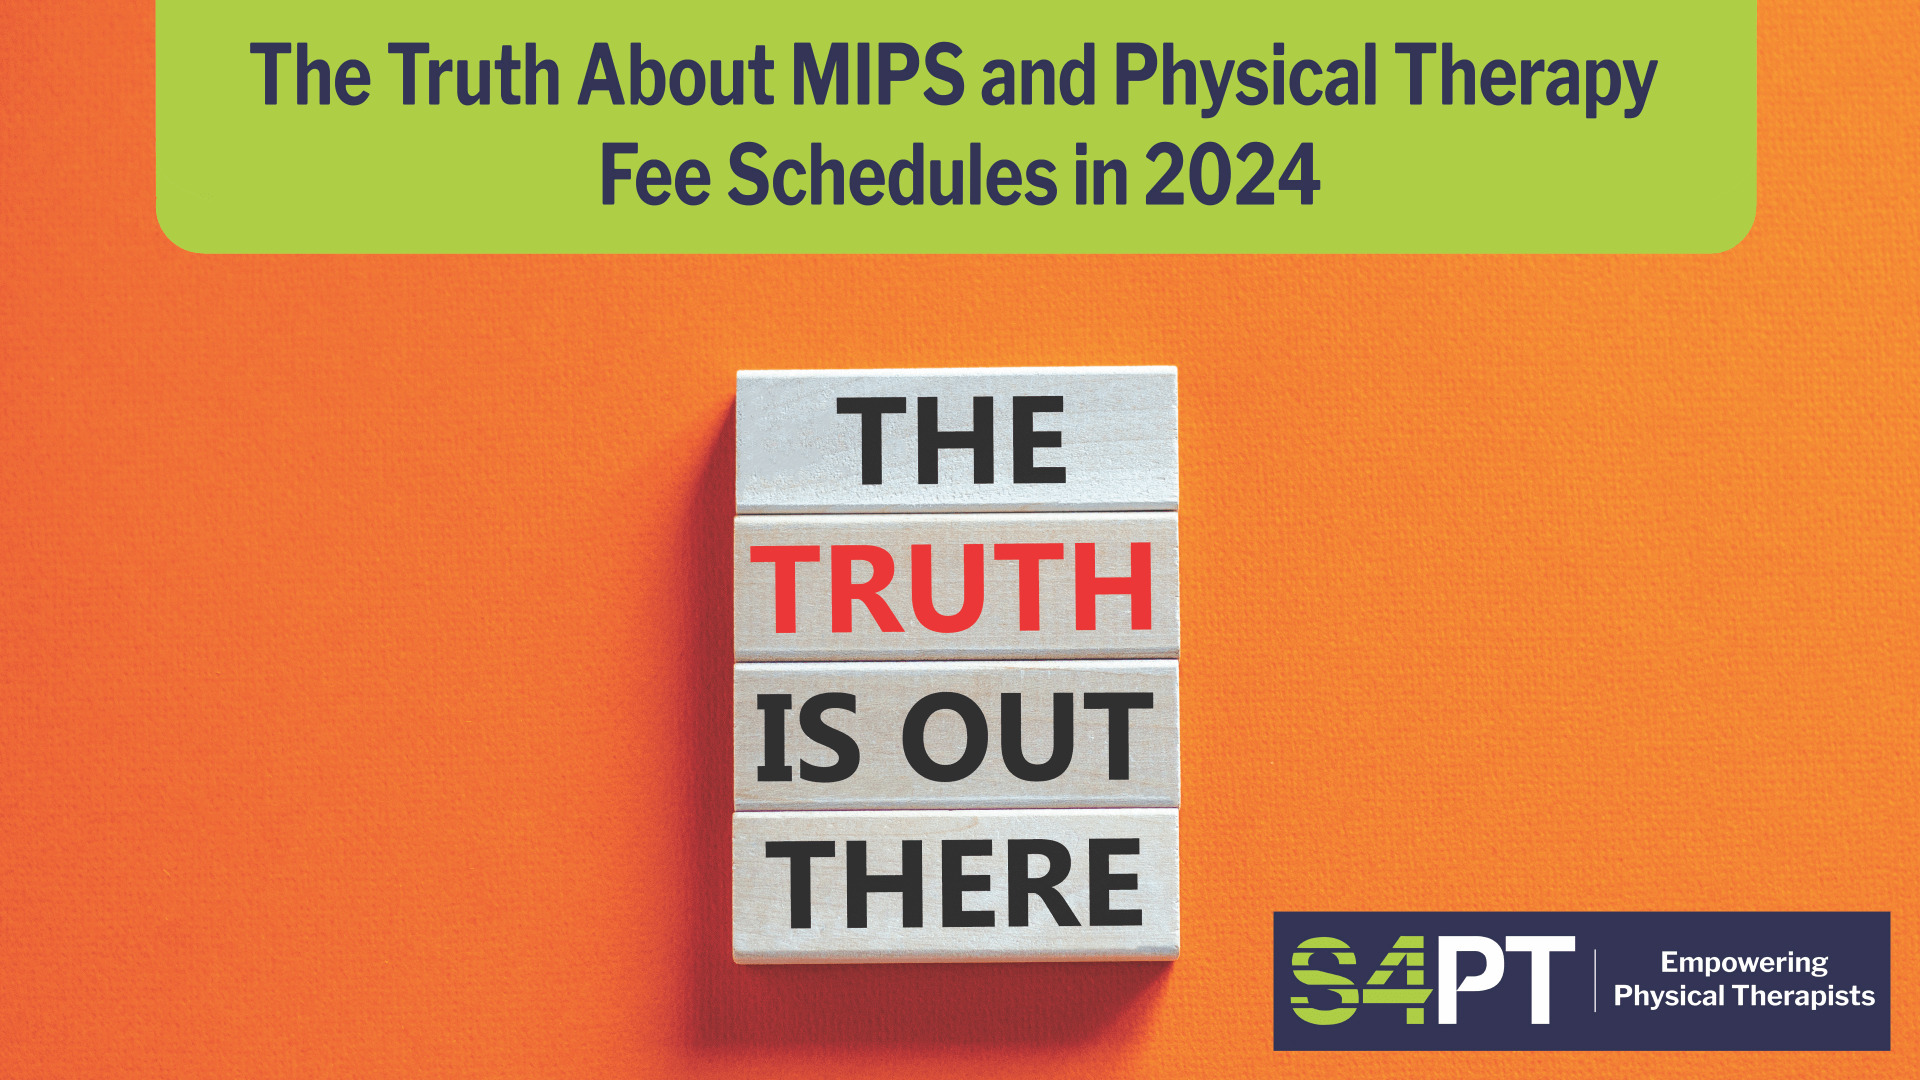 MIPS and Physical Therapy Fee Schedules in 2024